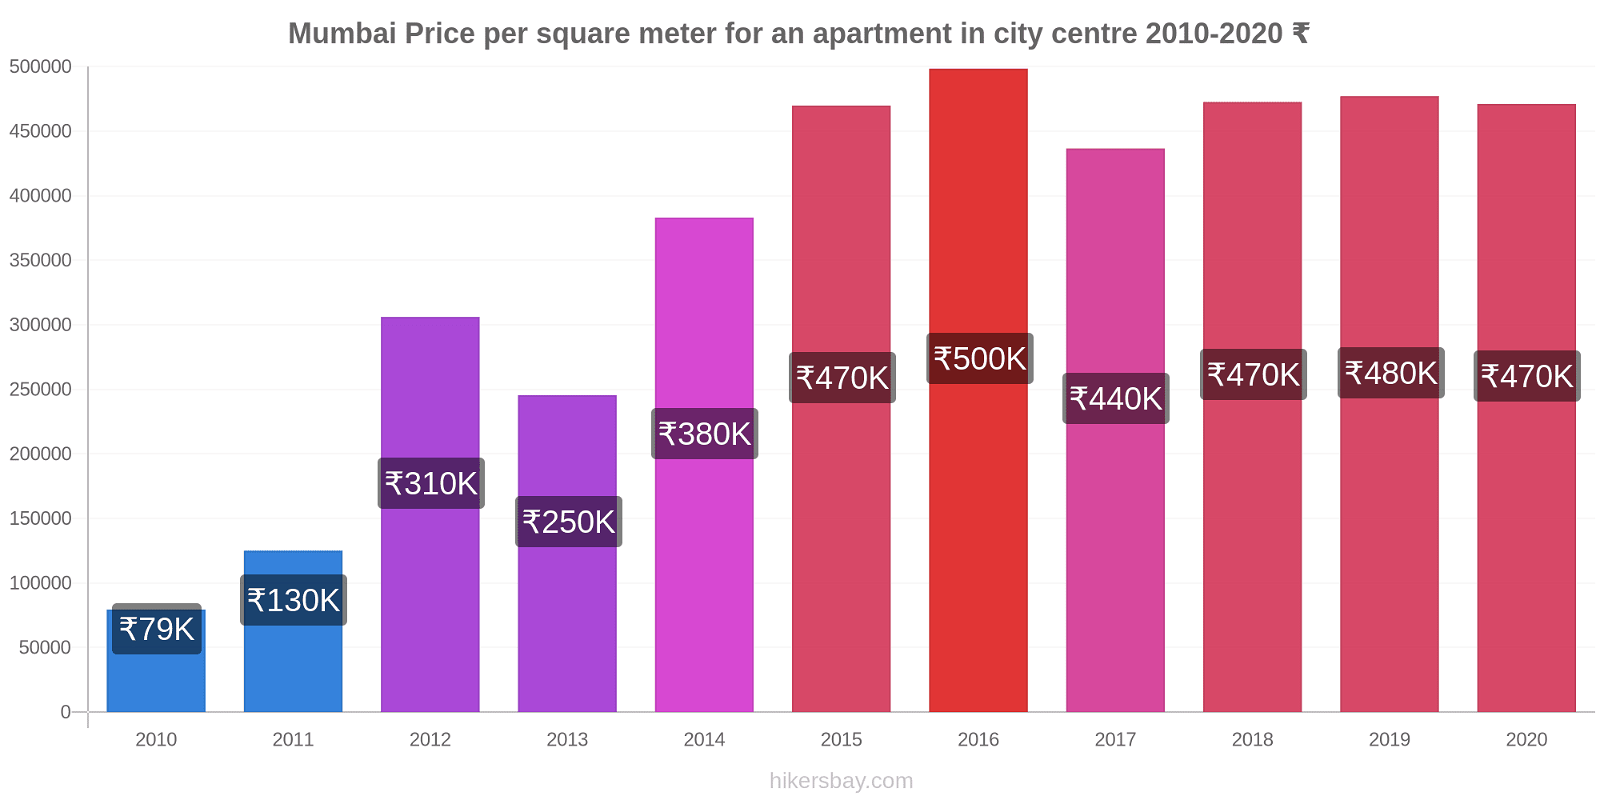 Mumbai price changes Price per square meter for an apartment in city centre hikersbay.com